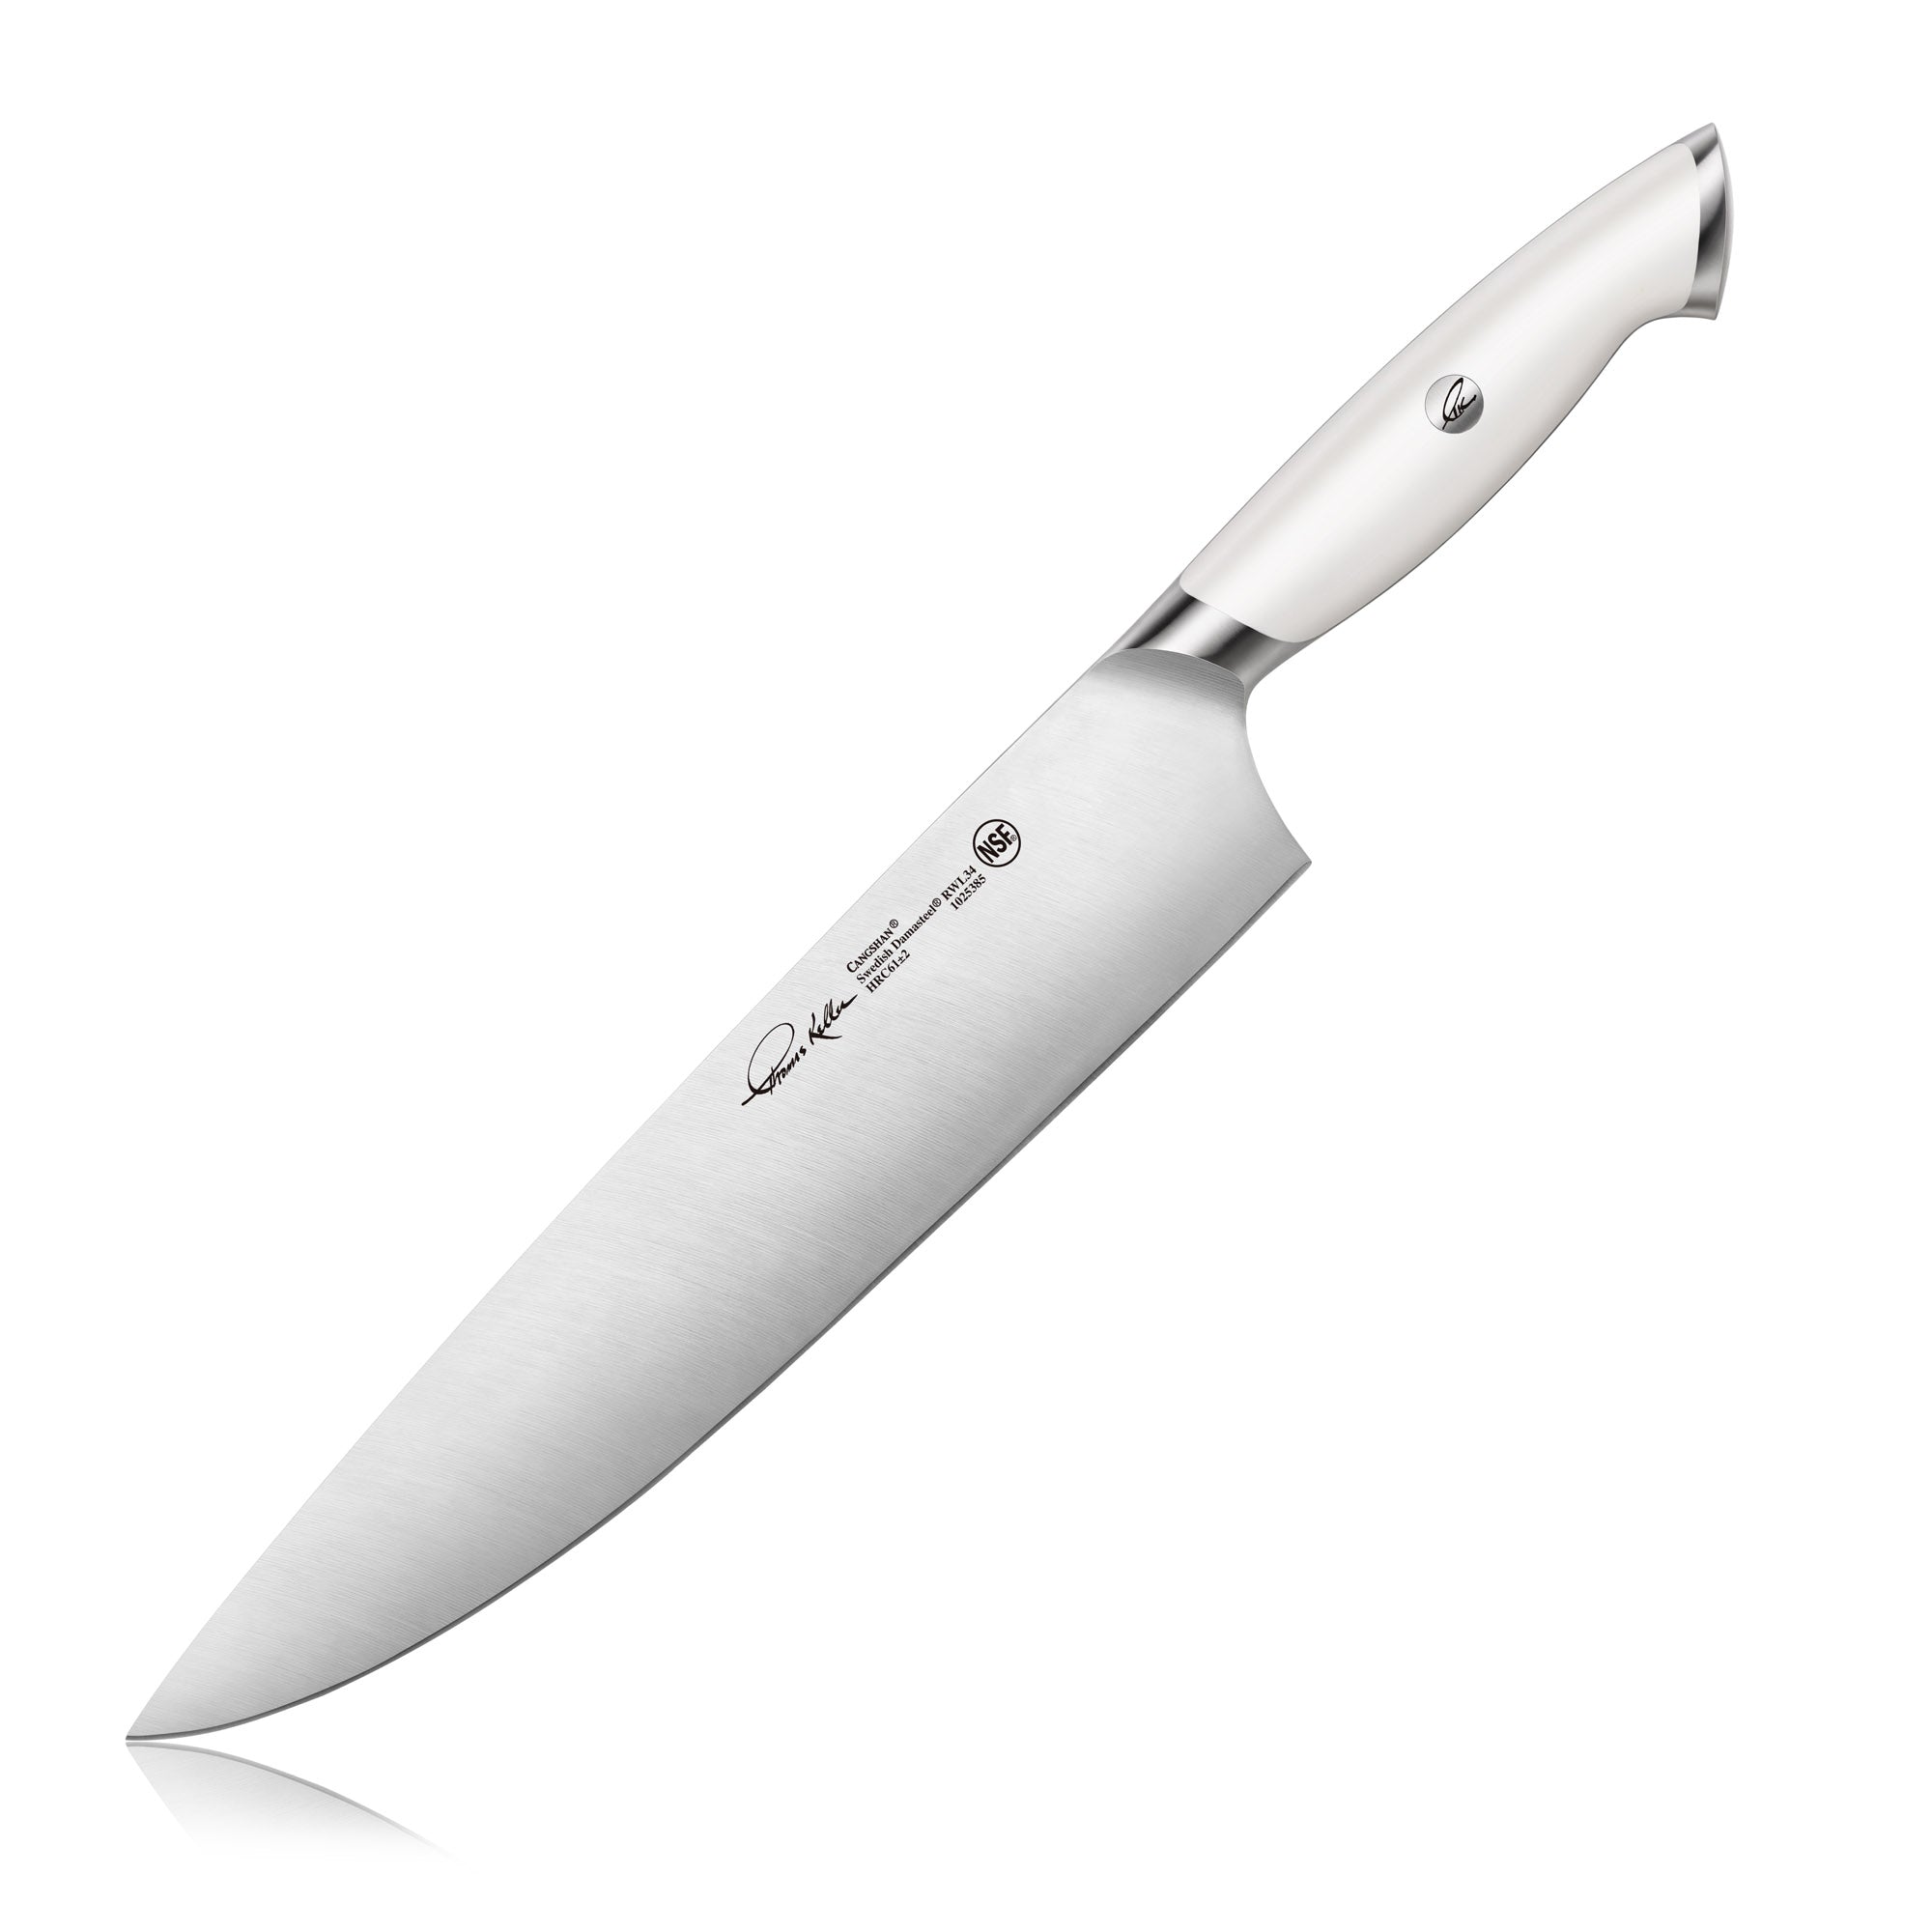 Thomas Keller Signature Collection 10" Chef's Knife, White